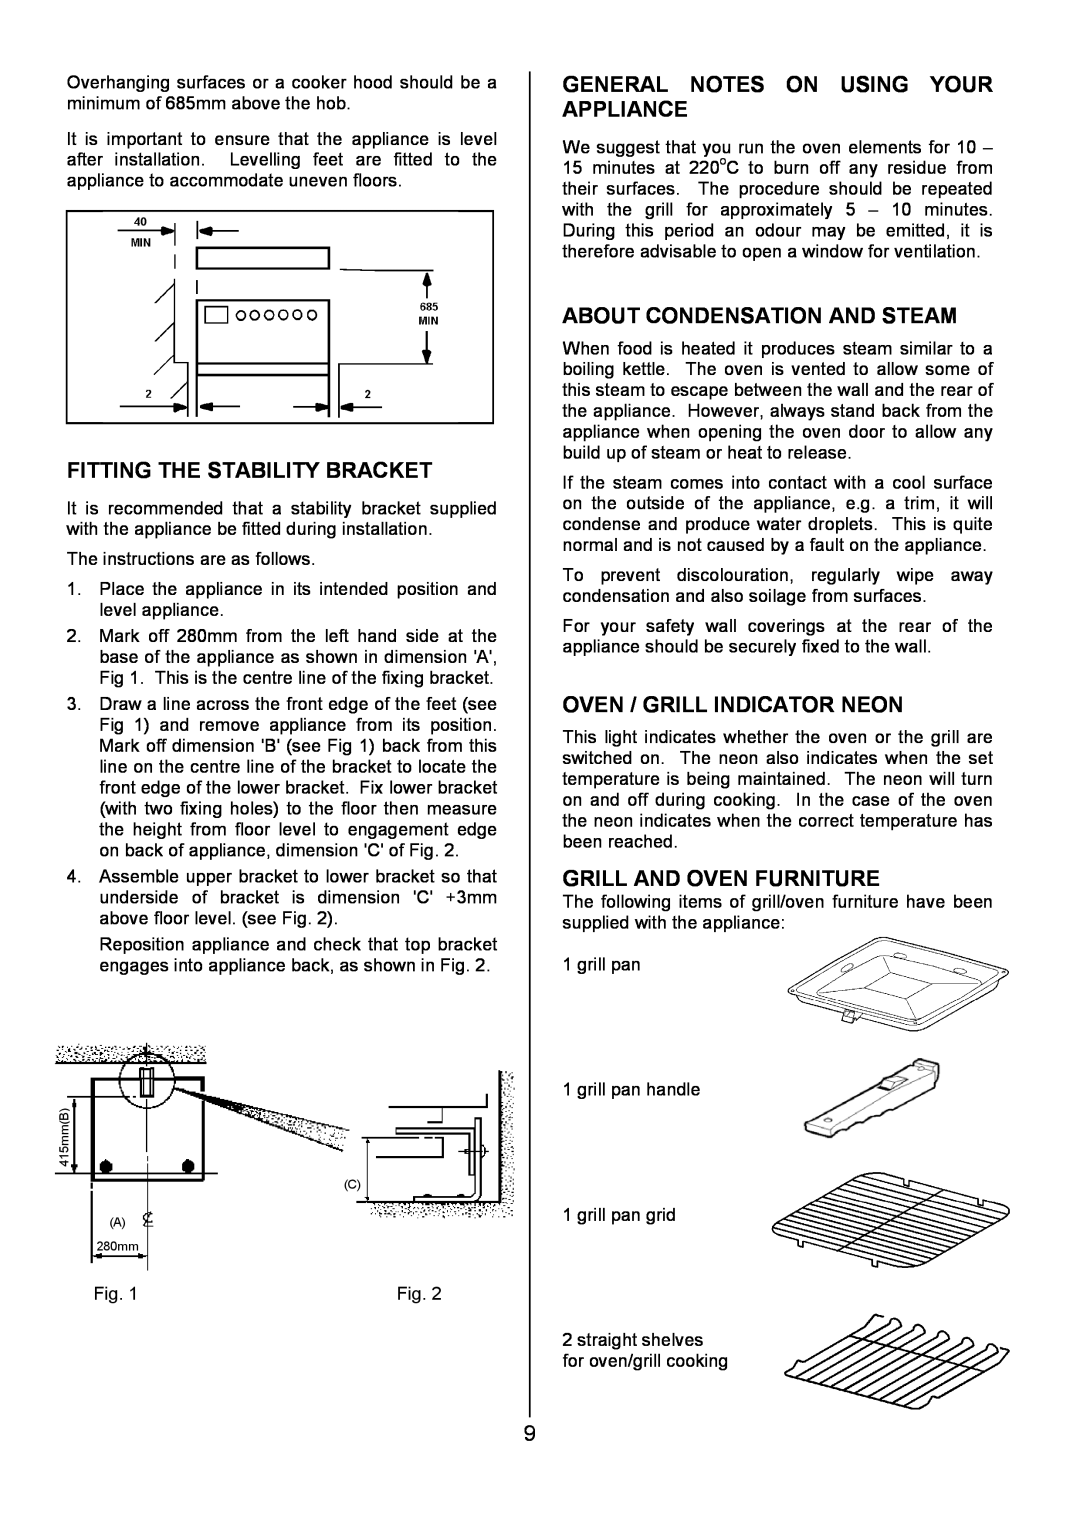 Tricity Bendix SIE 252 Fitting The Stability Bracket, General Notes On Using Your Appliance, About Condensation And Steam 